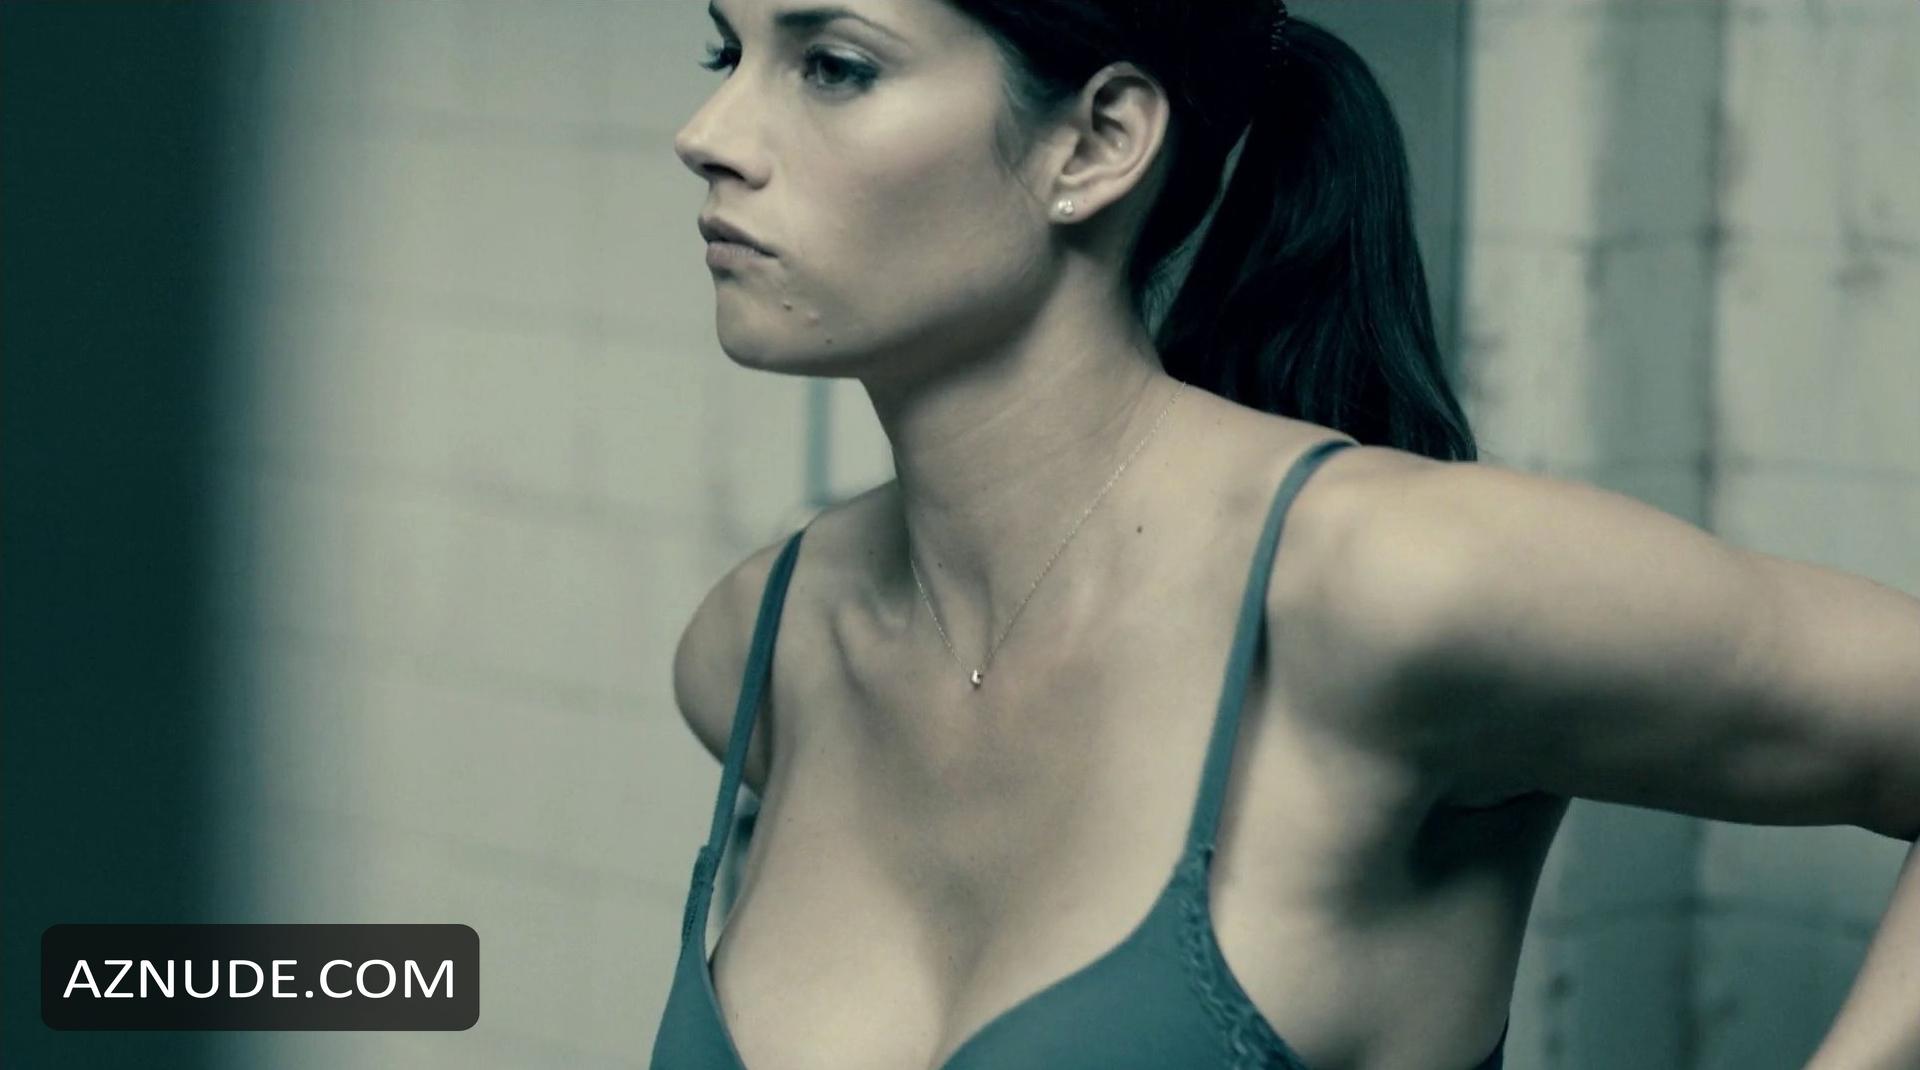 diana tabarez recommends missy peregrym topless pic